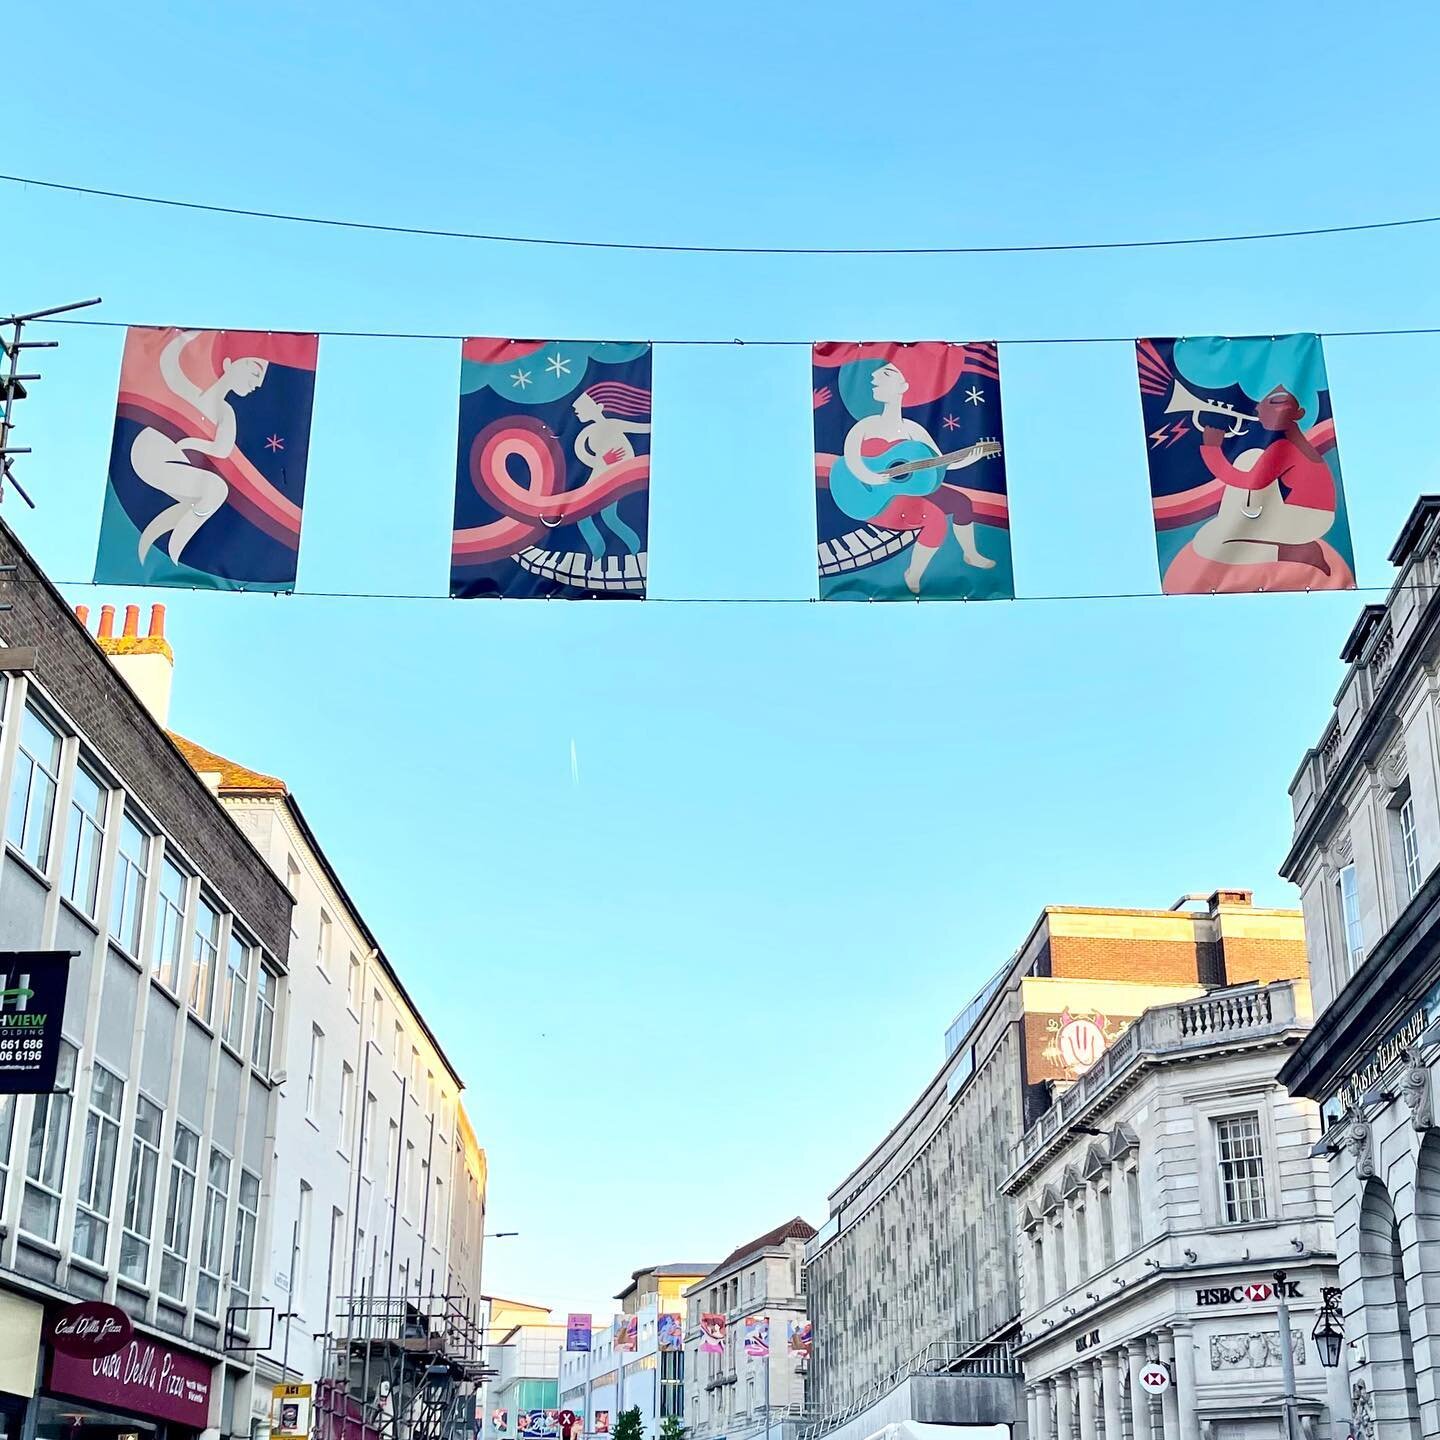 Had to get up ridiculously early in order to photograph my banners in the streets of Brighton without getting run over by a bus! So happy to be part of this project for @brilliantbrighton , brightening up our streets for the summer 🌞